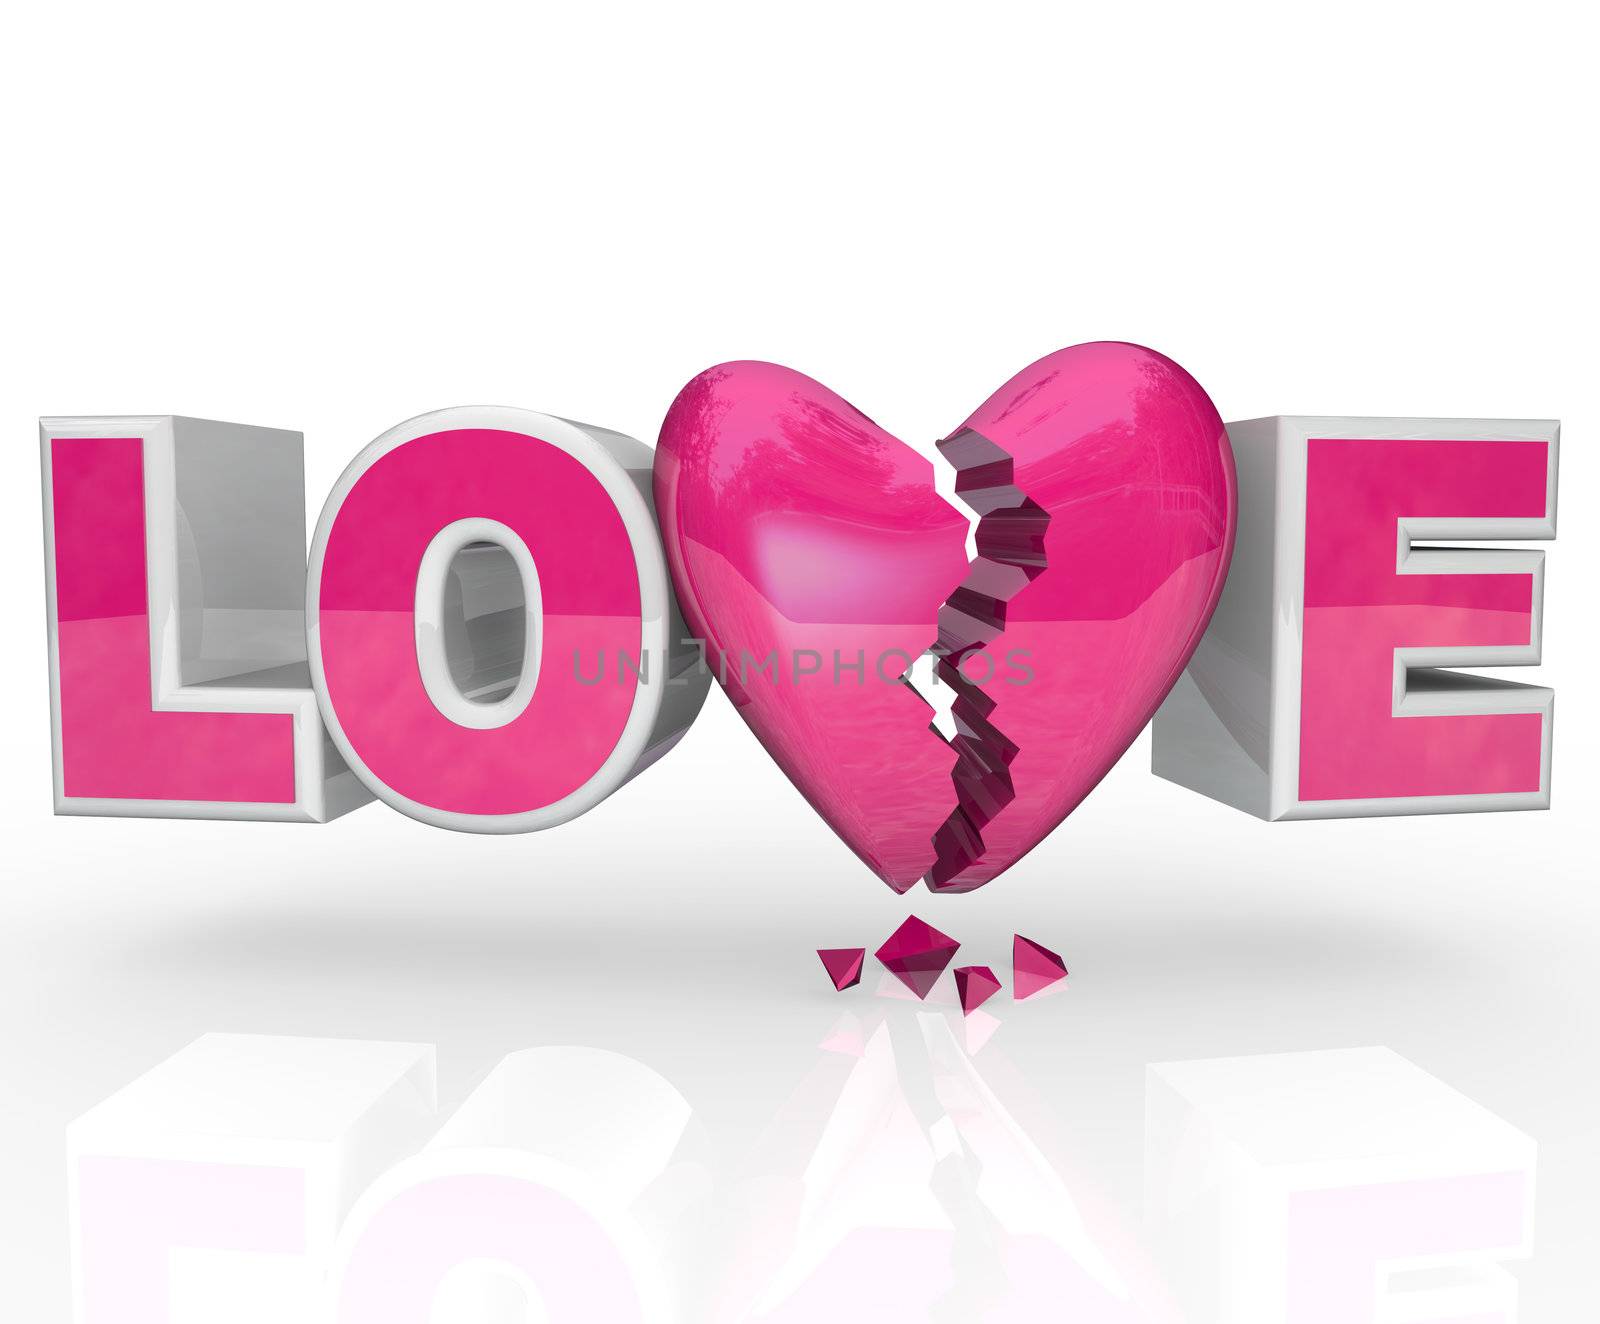 The word Love with a broken heart in place of the letter V representing a break up or dissolved relationship